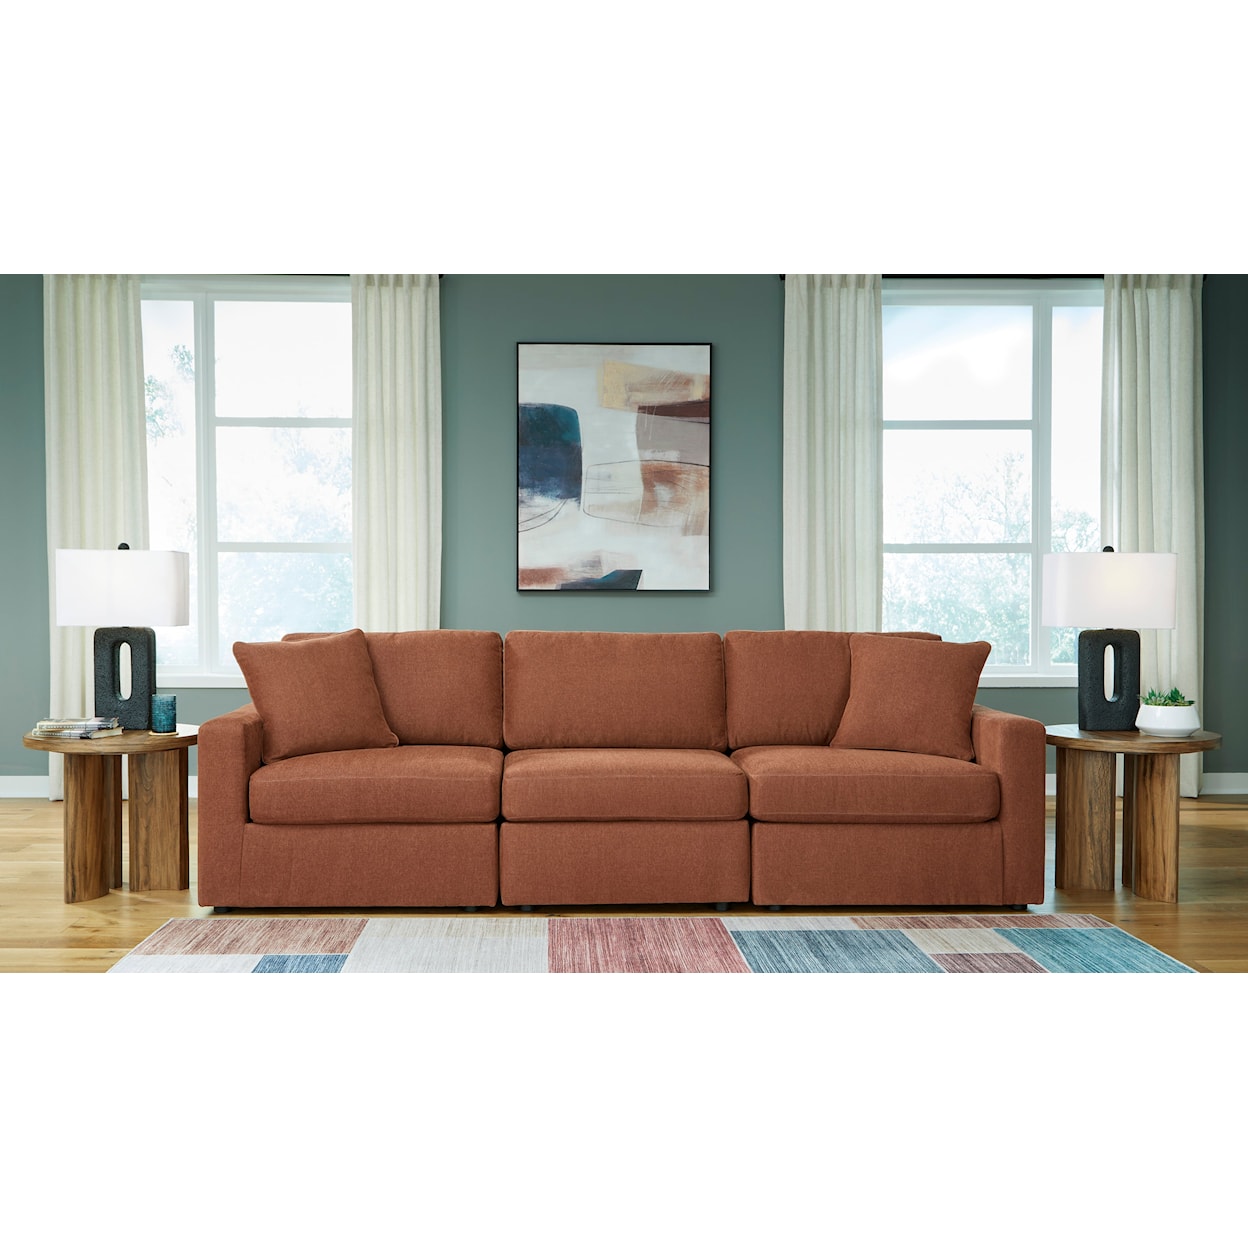 Signature Design by Ashley Modmax 3-Piece Sectional Sofa